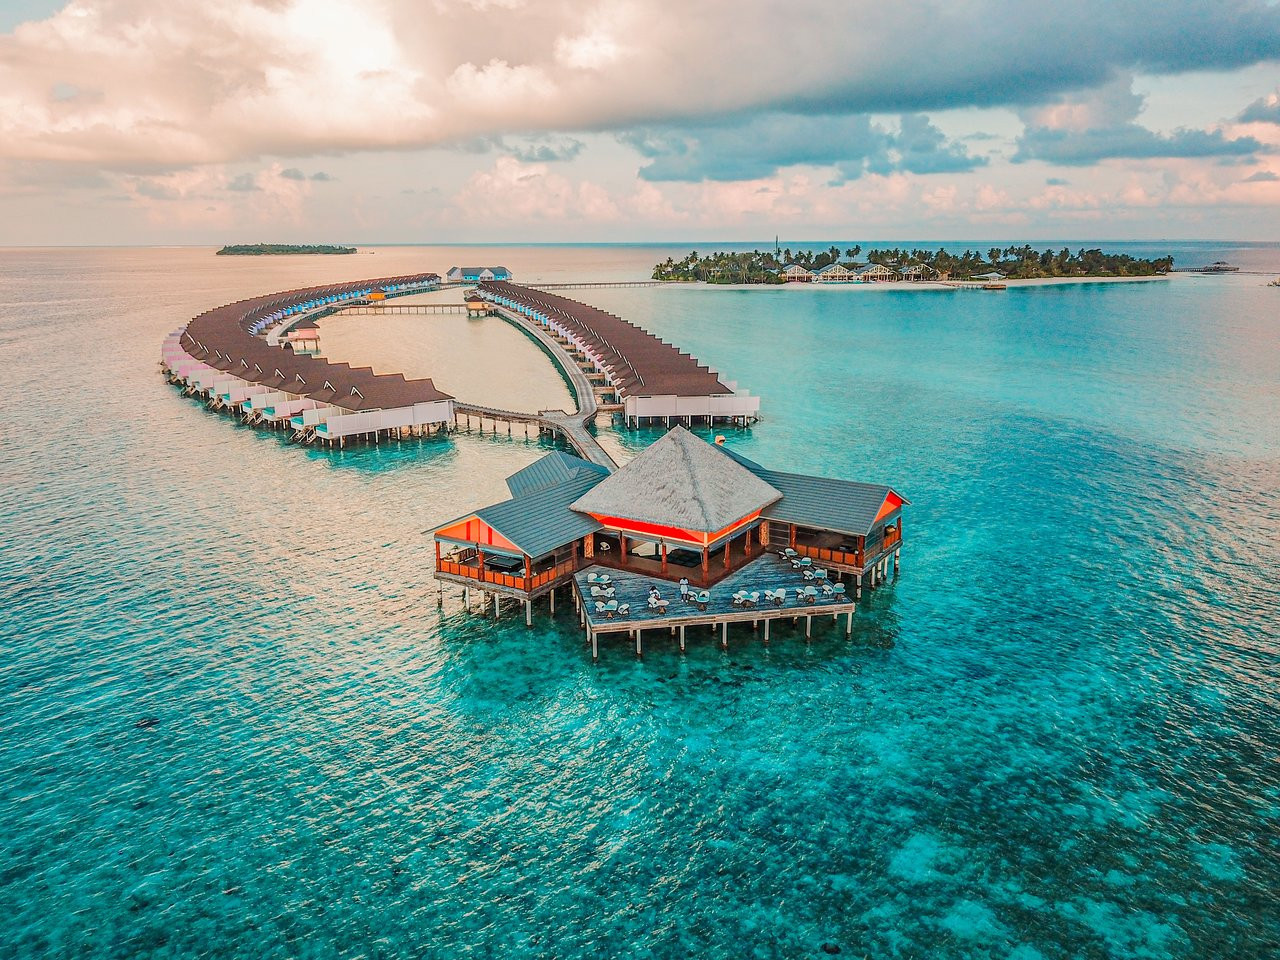 The Coolest Address in the Maldives, You Ask? The Standard Maldives it is!